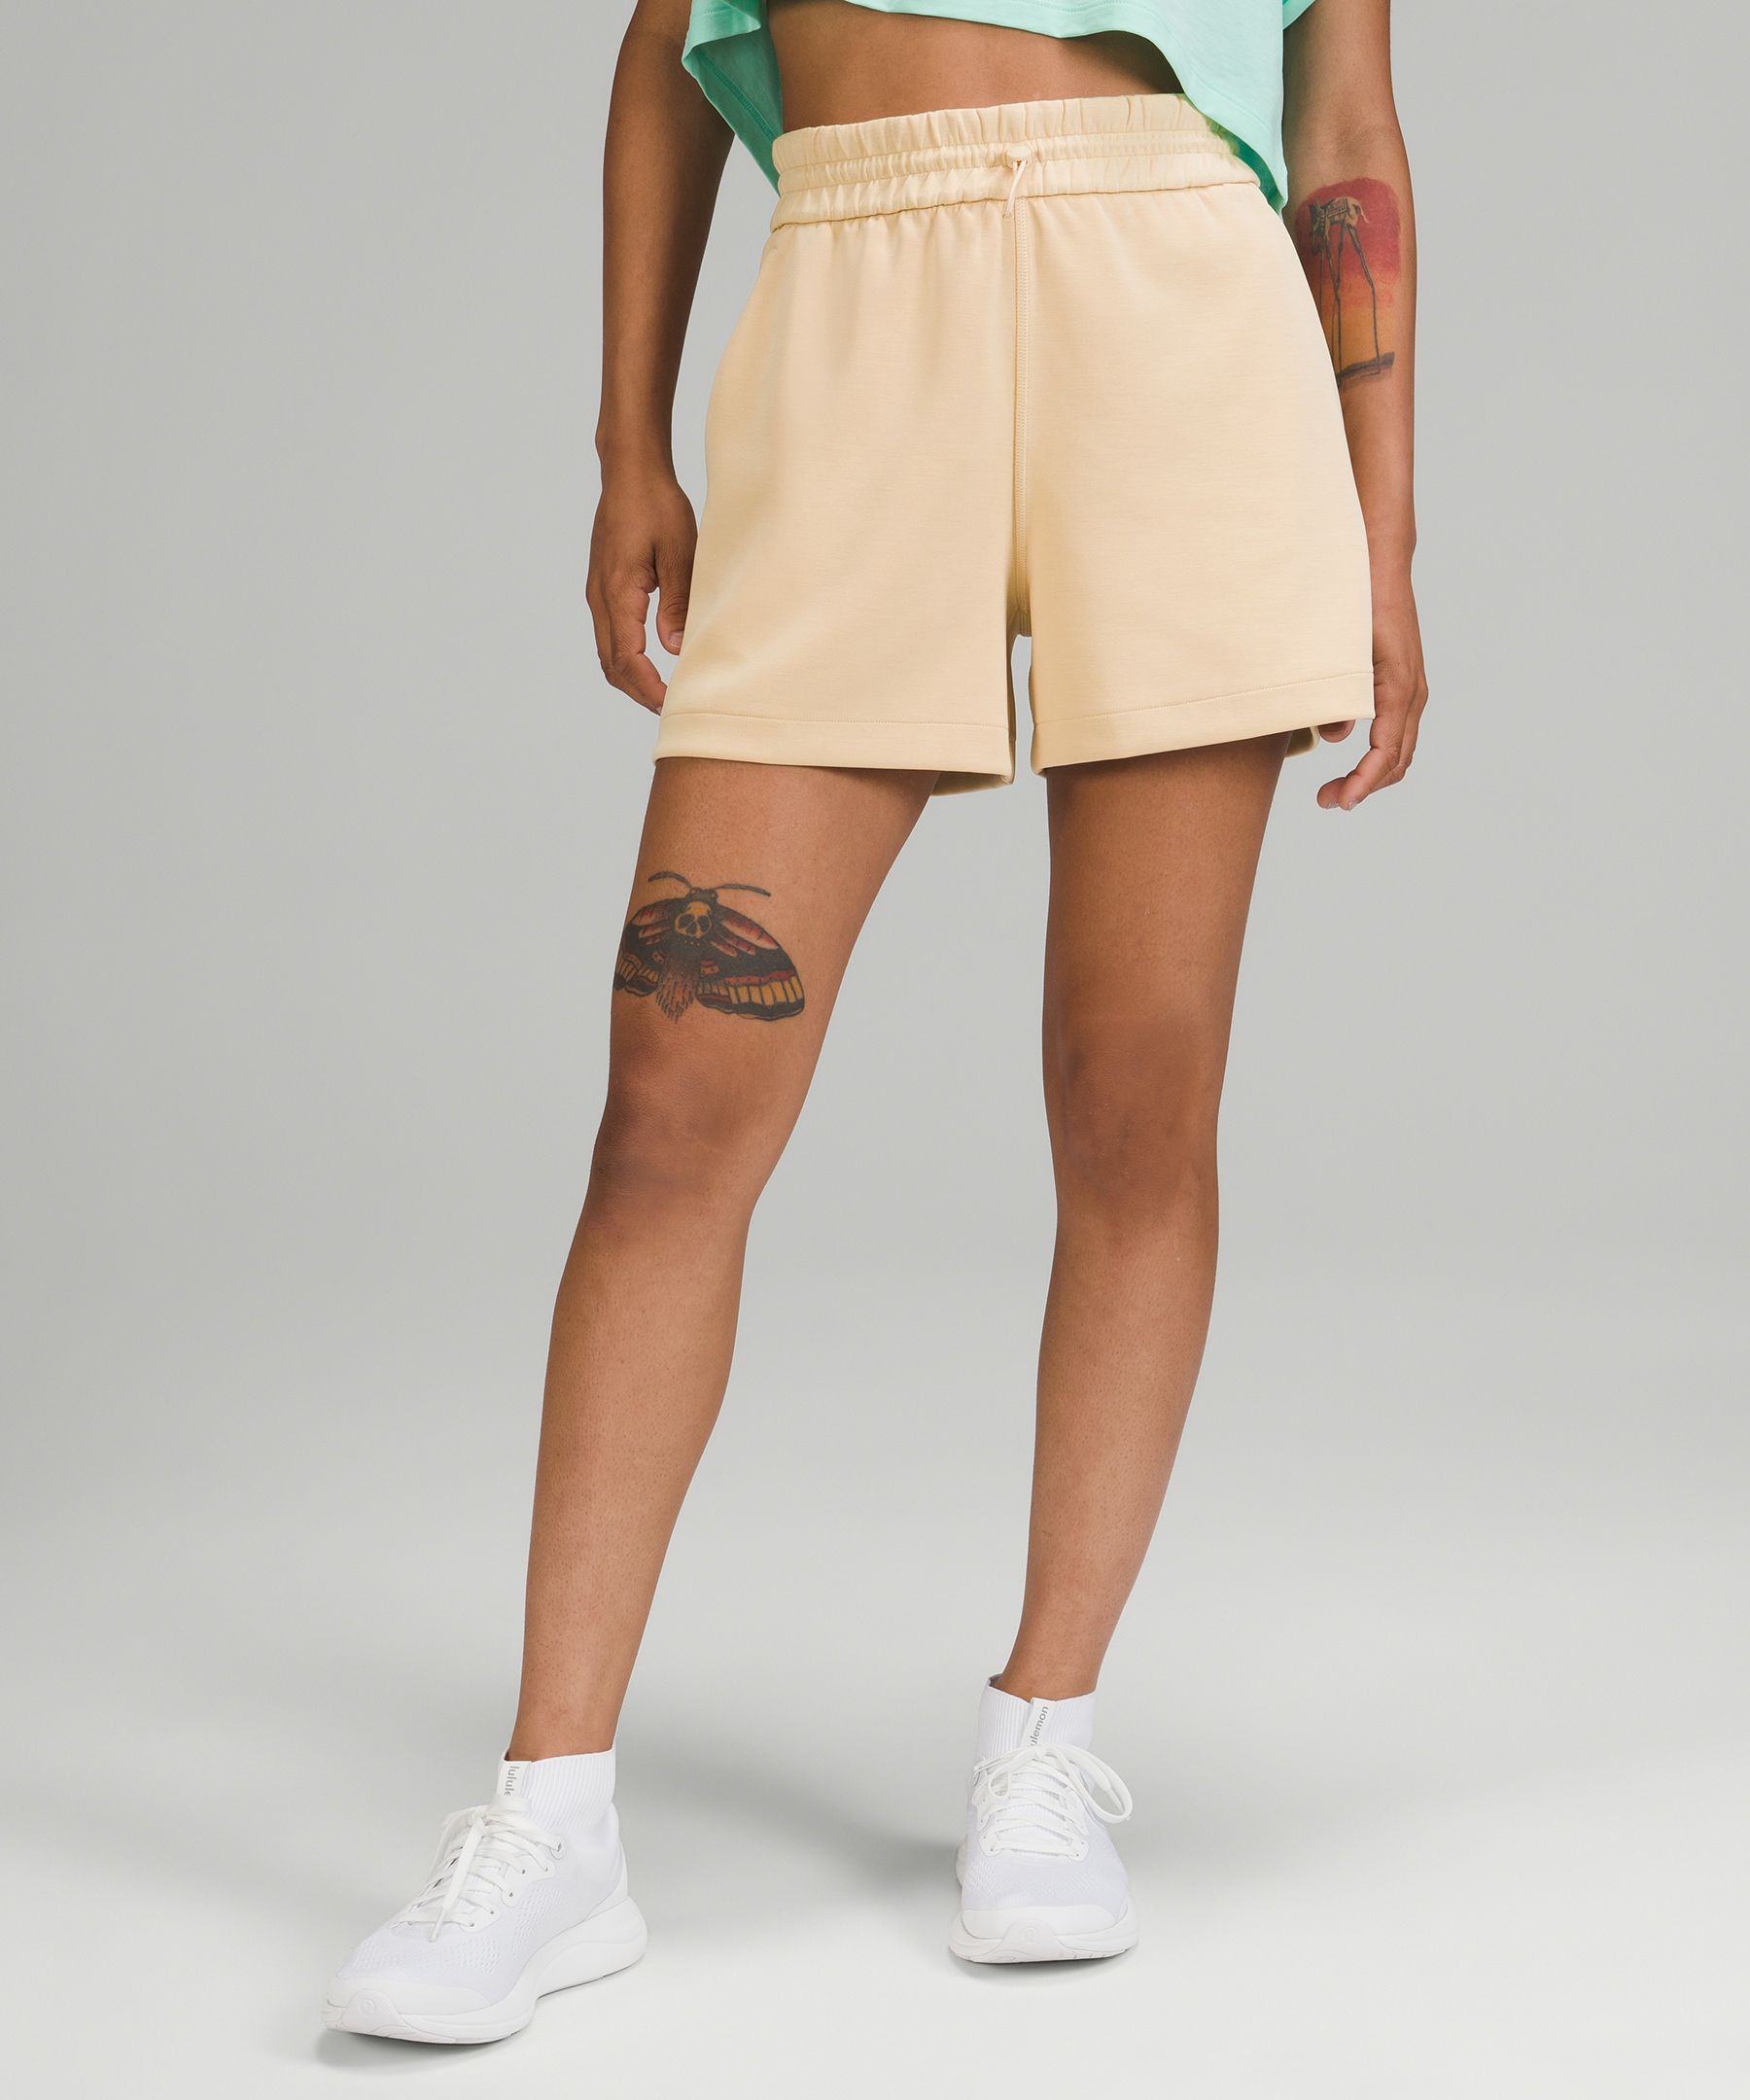 Lululemon Softstreme High-rise Shorts 4" In Prosecco